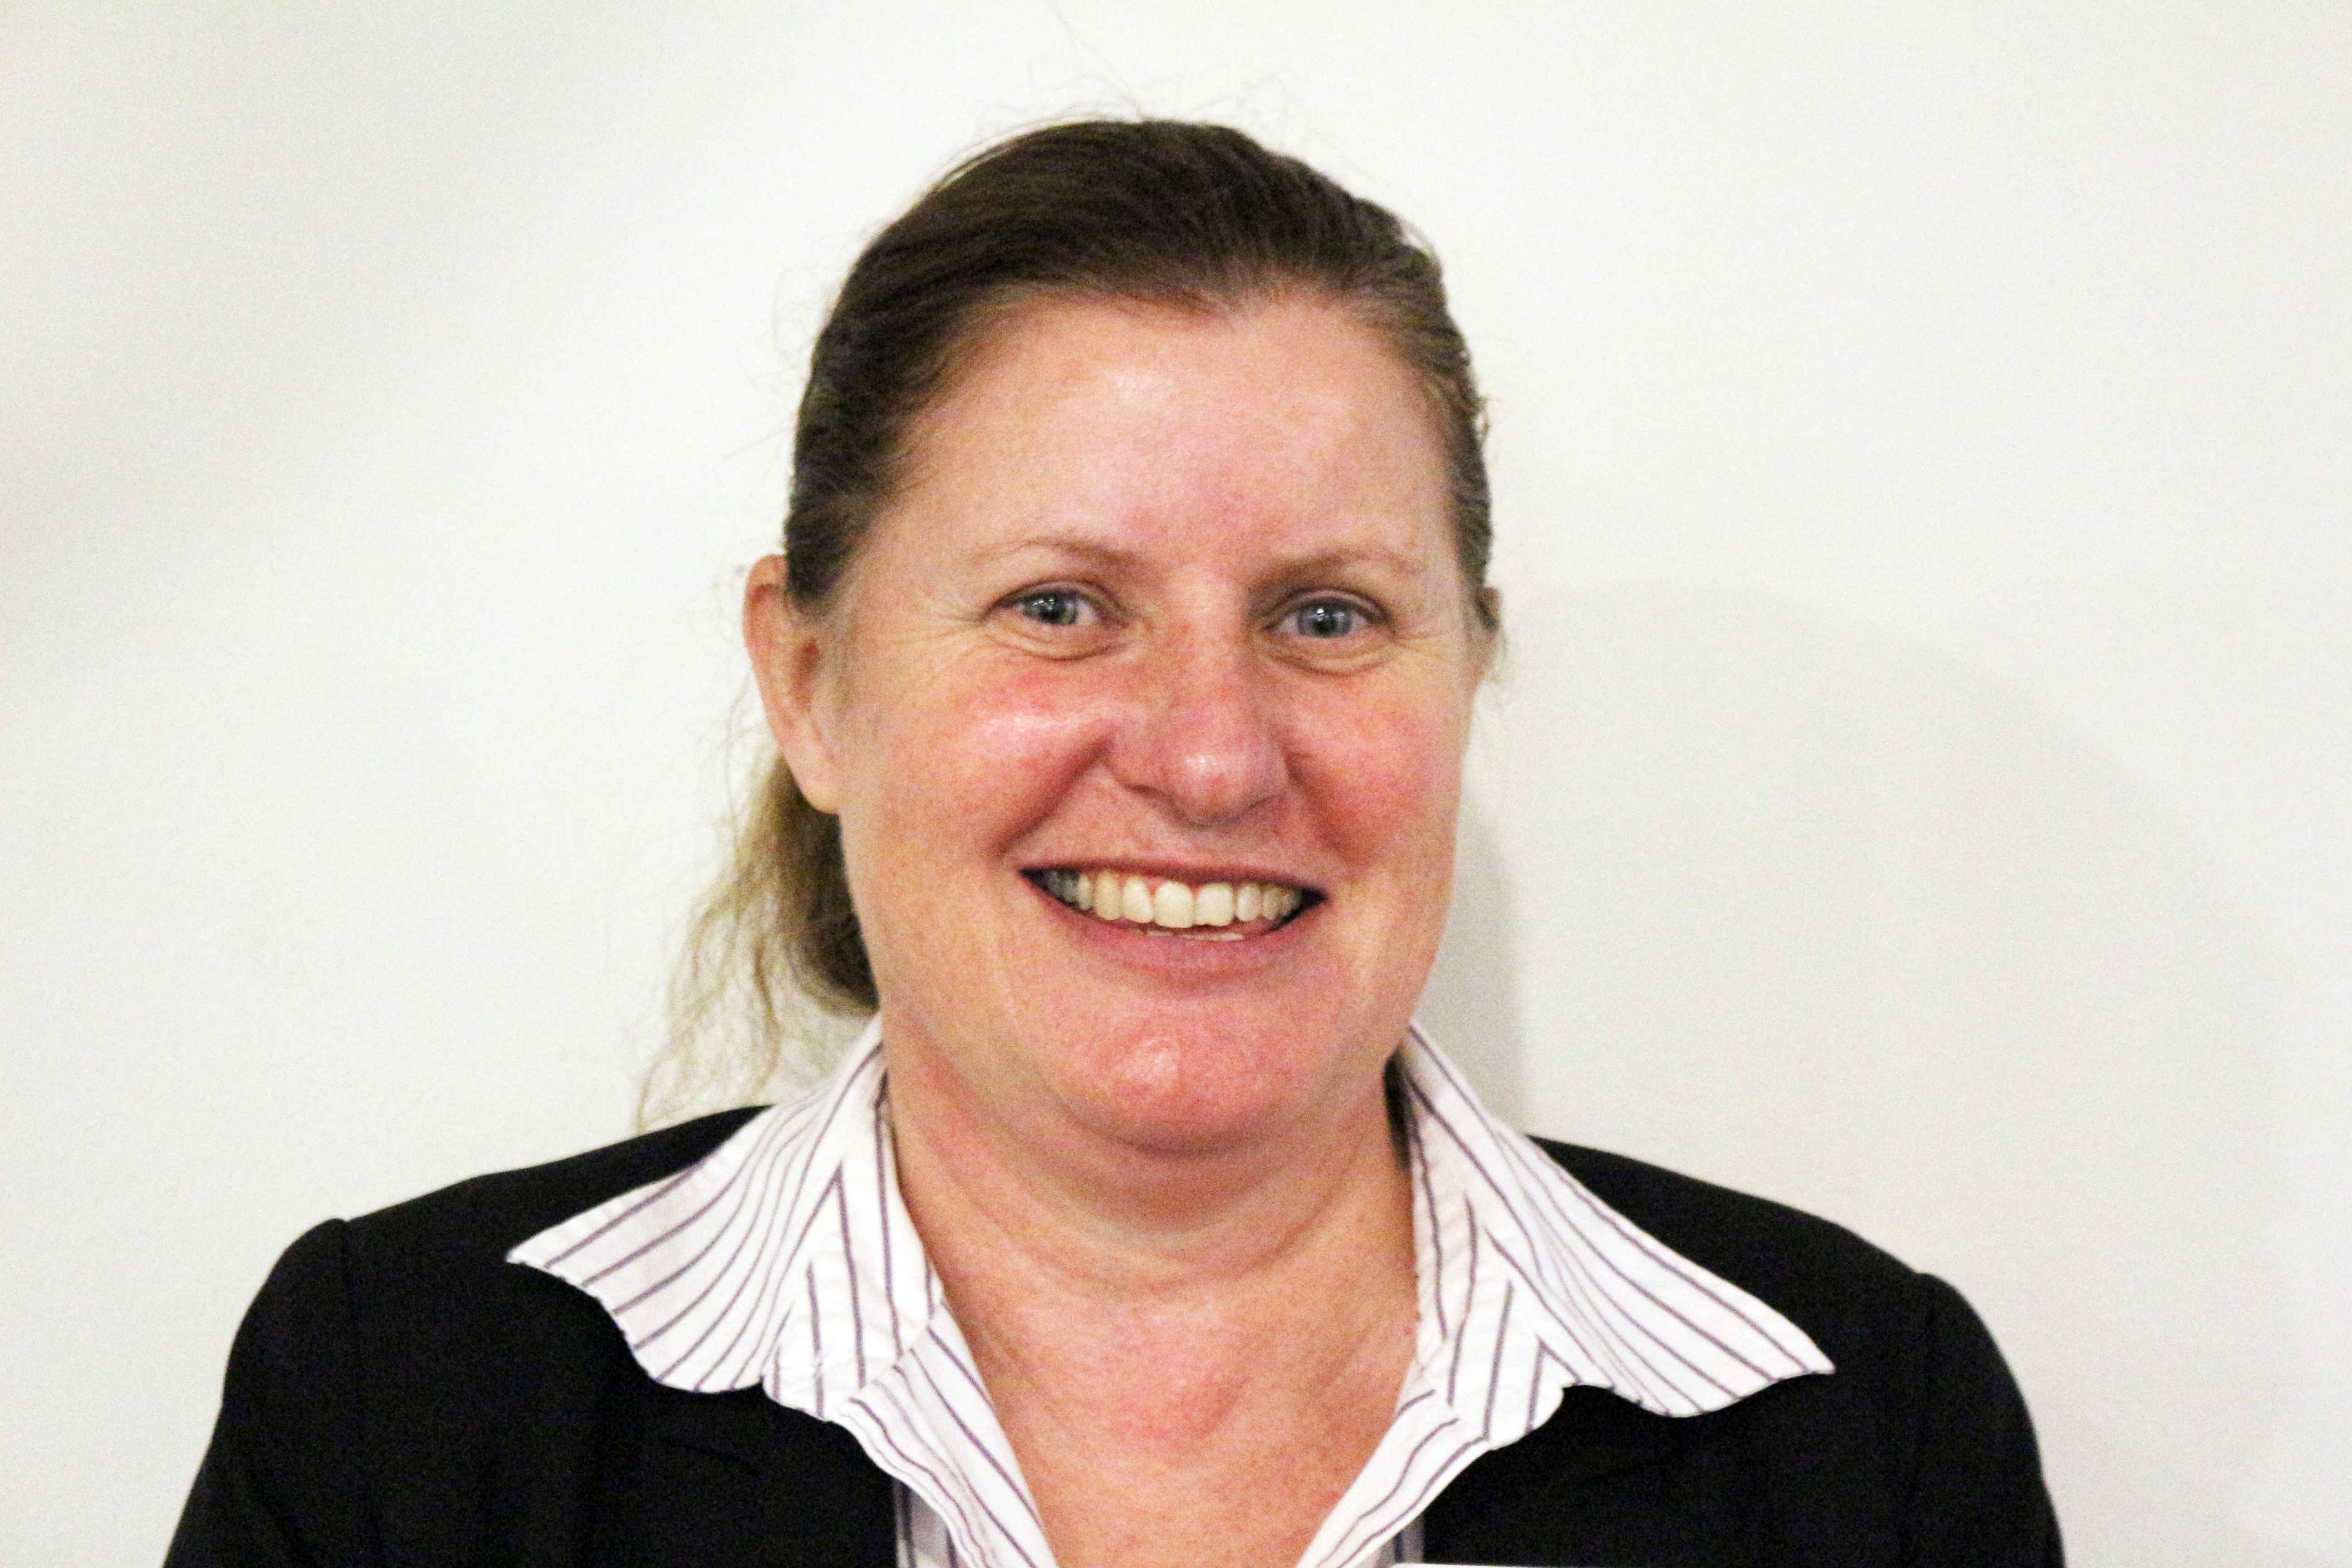 Deborah Payne is the Facility Manager at Ridgeview Aged Care.